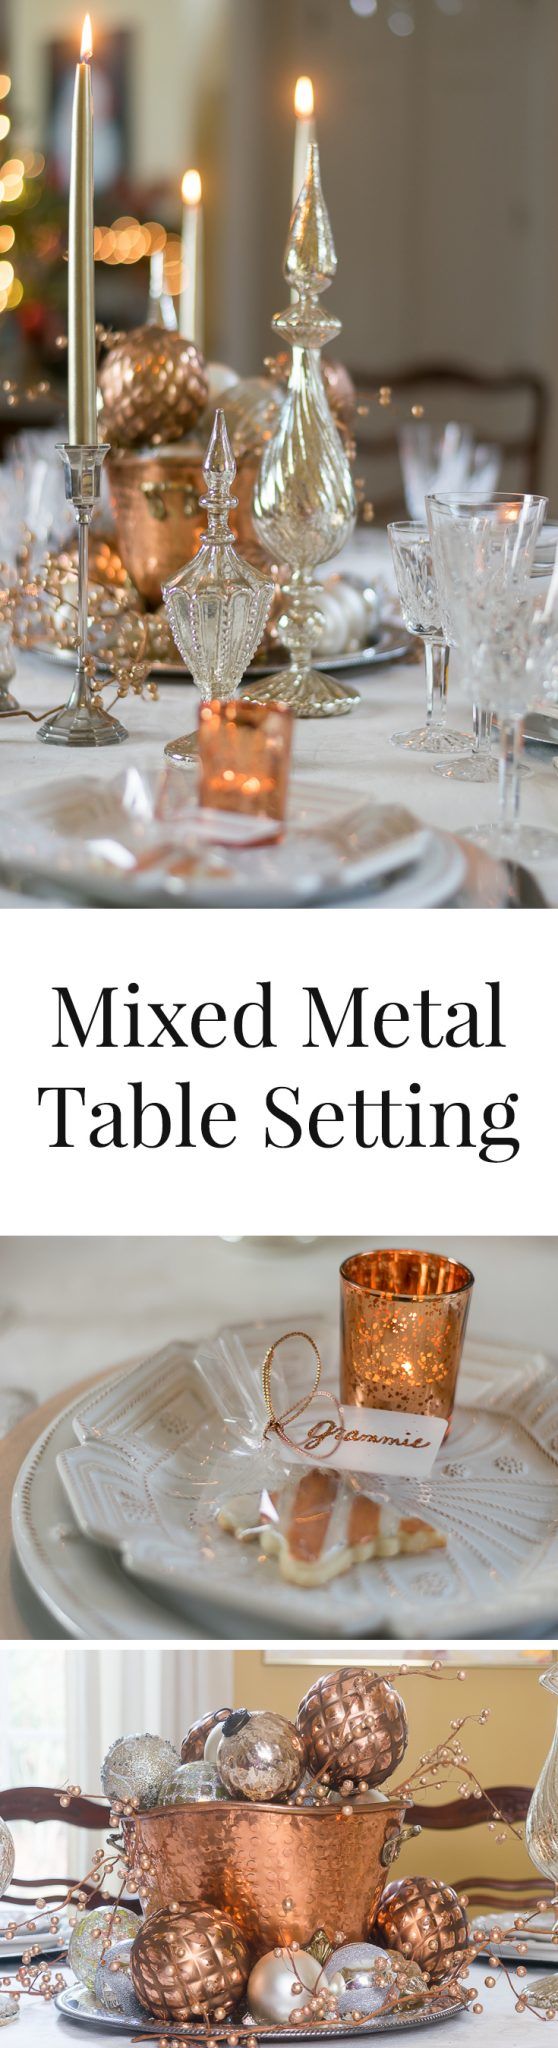 If you want to embrace copper but feel bad putting away your silver, then don't! I am all about mixing metals, letting them play off of each other and enhancing each other. This Mixed Metals Table Setting uses a combination of metals to achieve a warm and lustrous feel. Home Decor. Tablescape. Table Setting. Table Centerpiece. Holiday. Entertaining. Tablescapes Ideas. Christmas Tablescapes